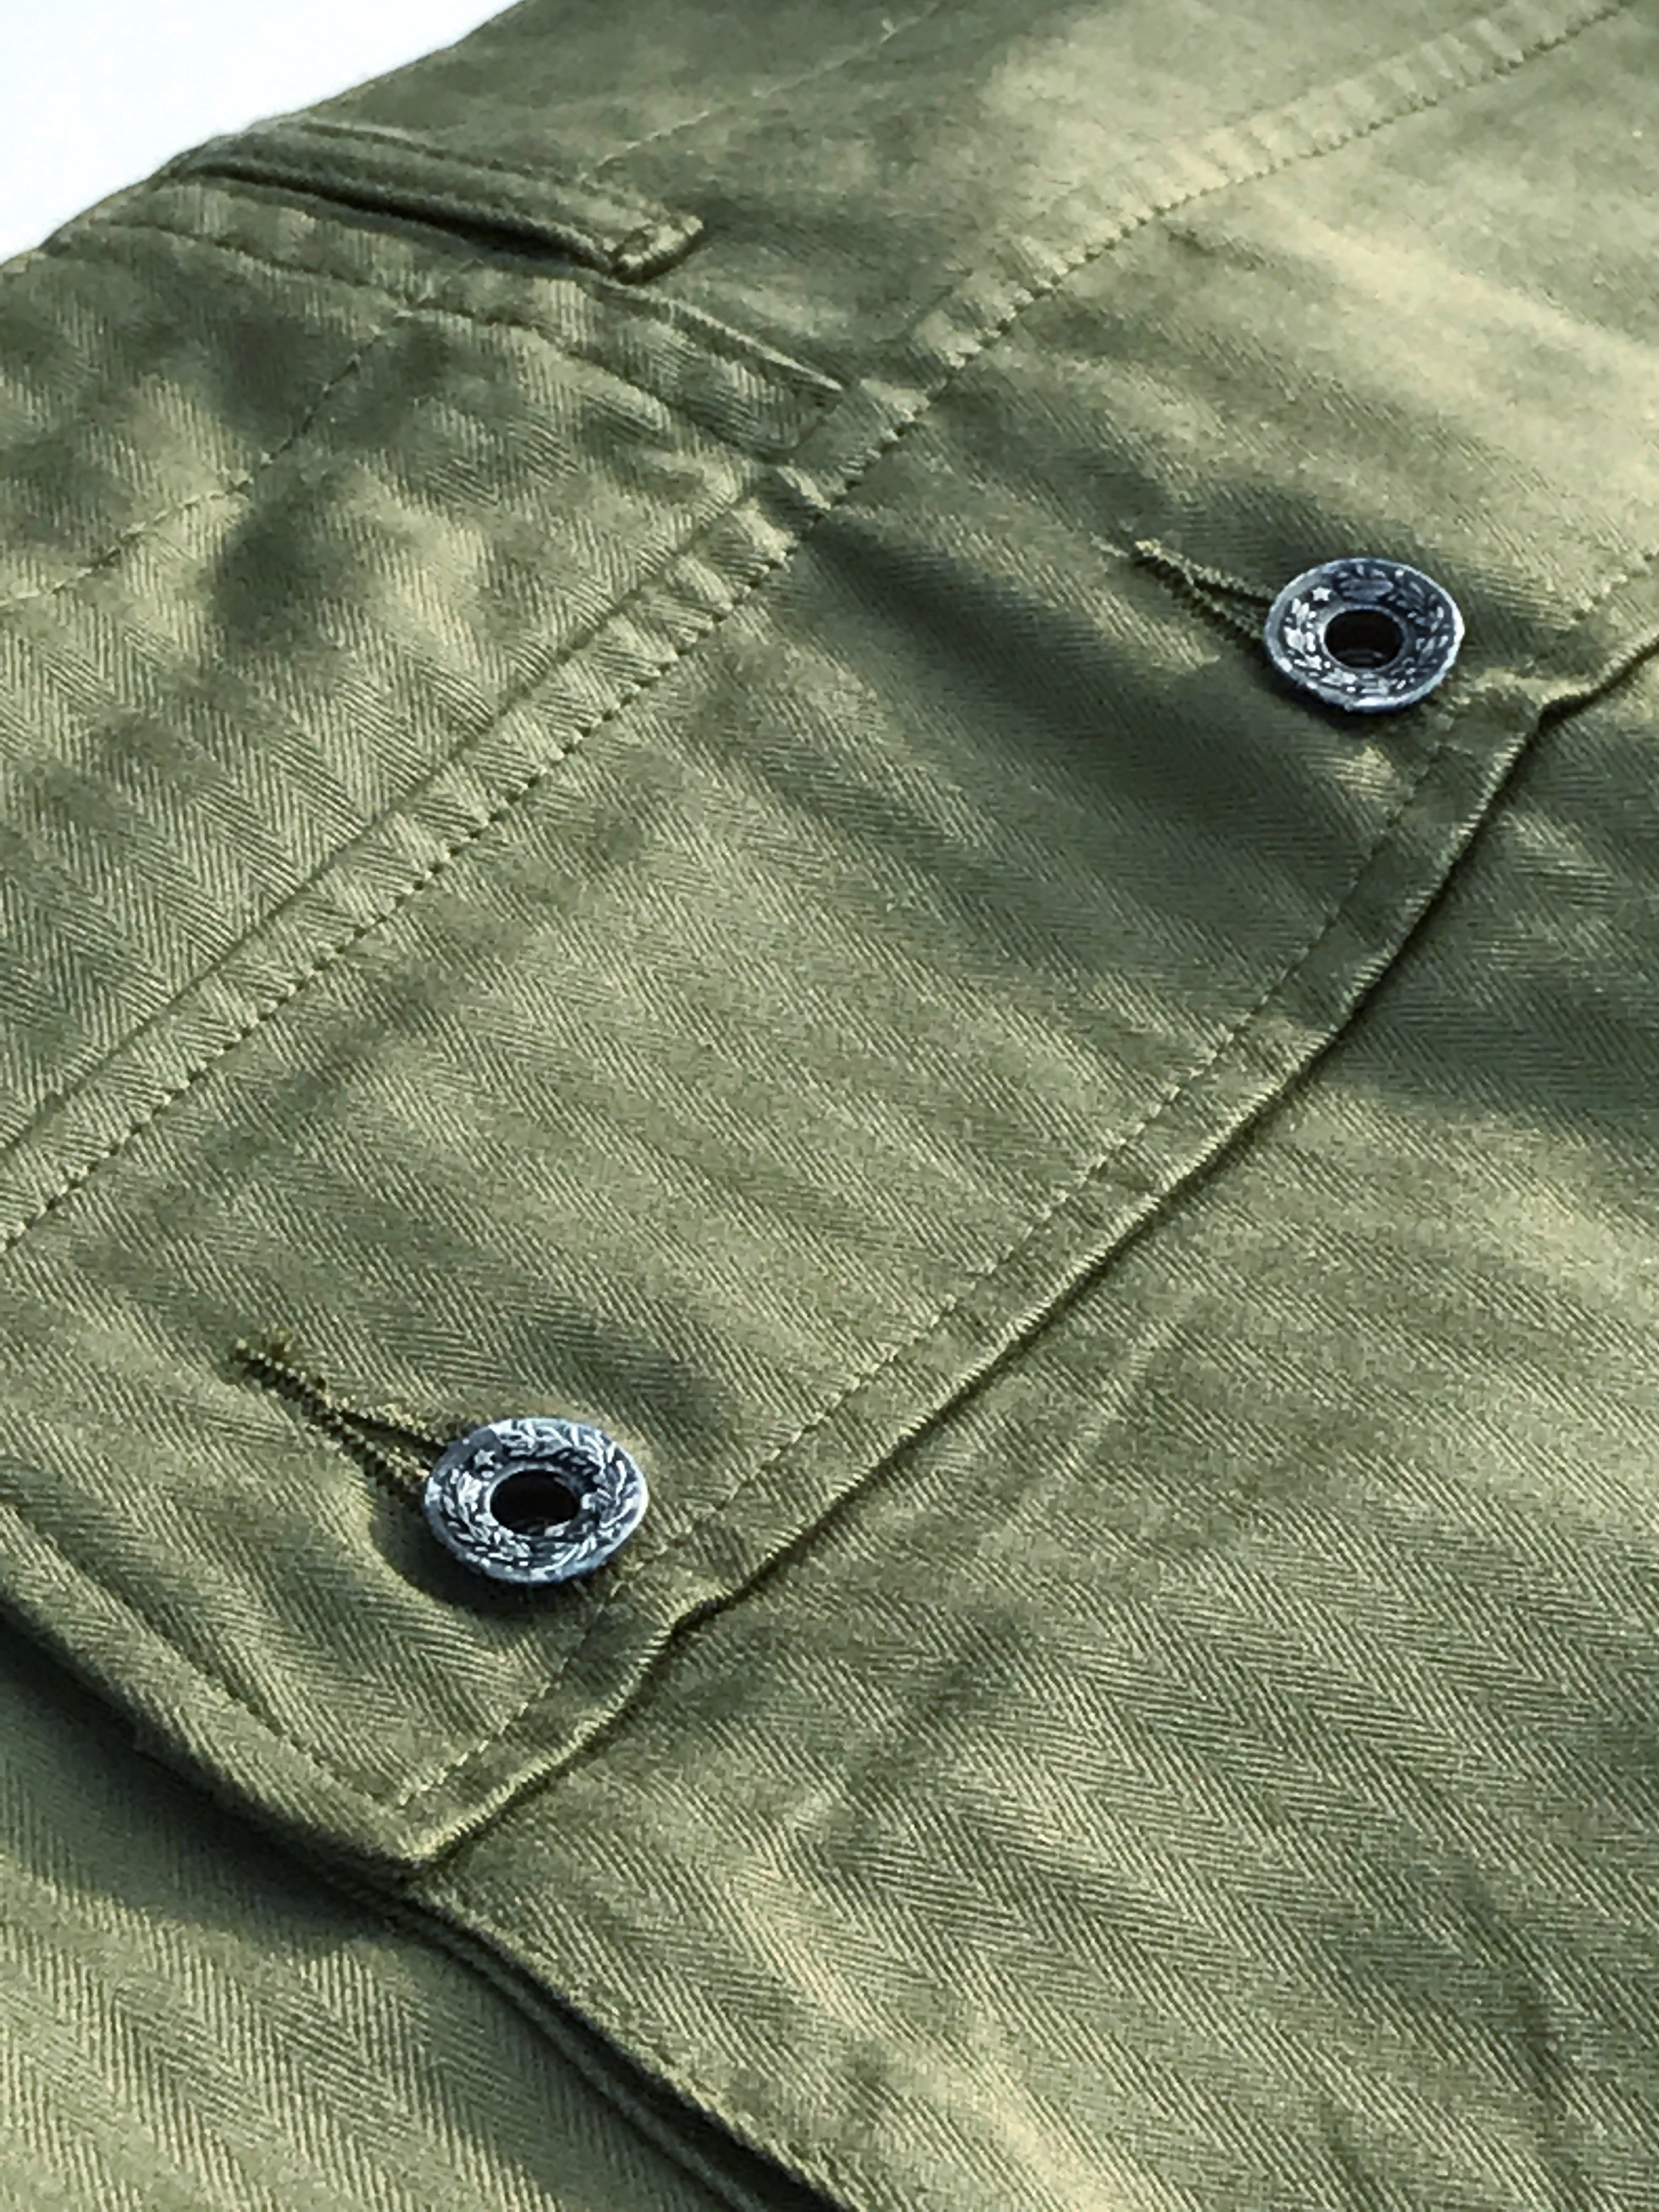 LD P44 Military Trousers in Olive HBT 'Monkey Pants'